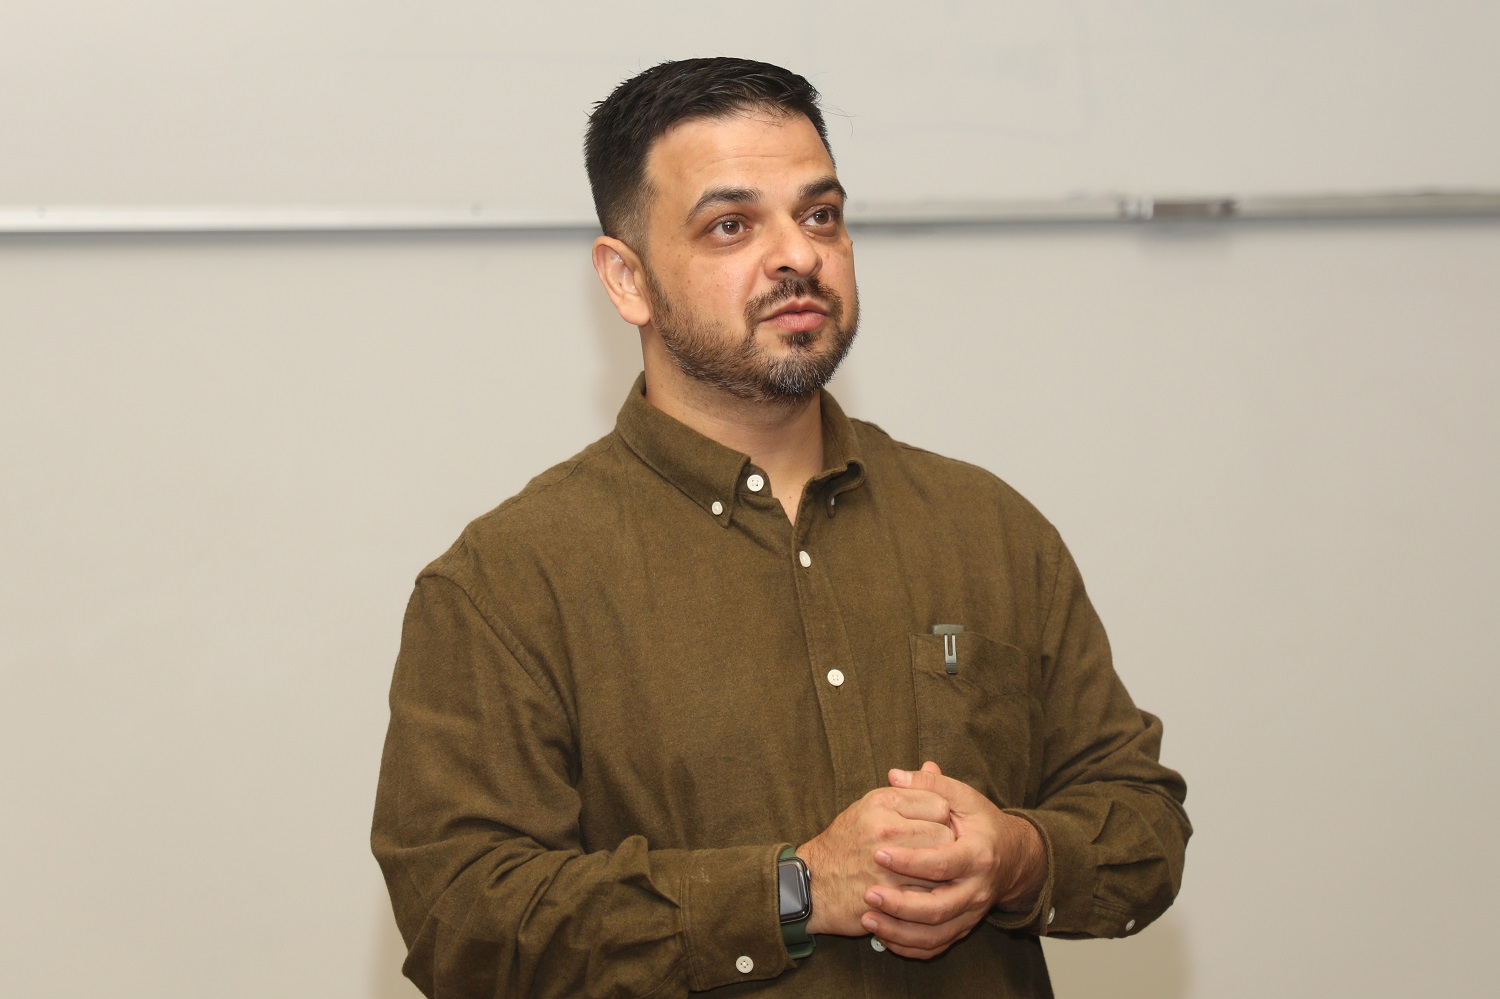 Vivek Prabhakar, Co-founder, Chumbak, speaks on: ‘What it takes to be a Creative Trendsetter and The Future of Fashion’, at Eximius on July 10, 2022.